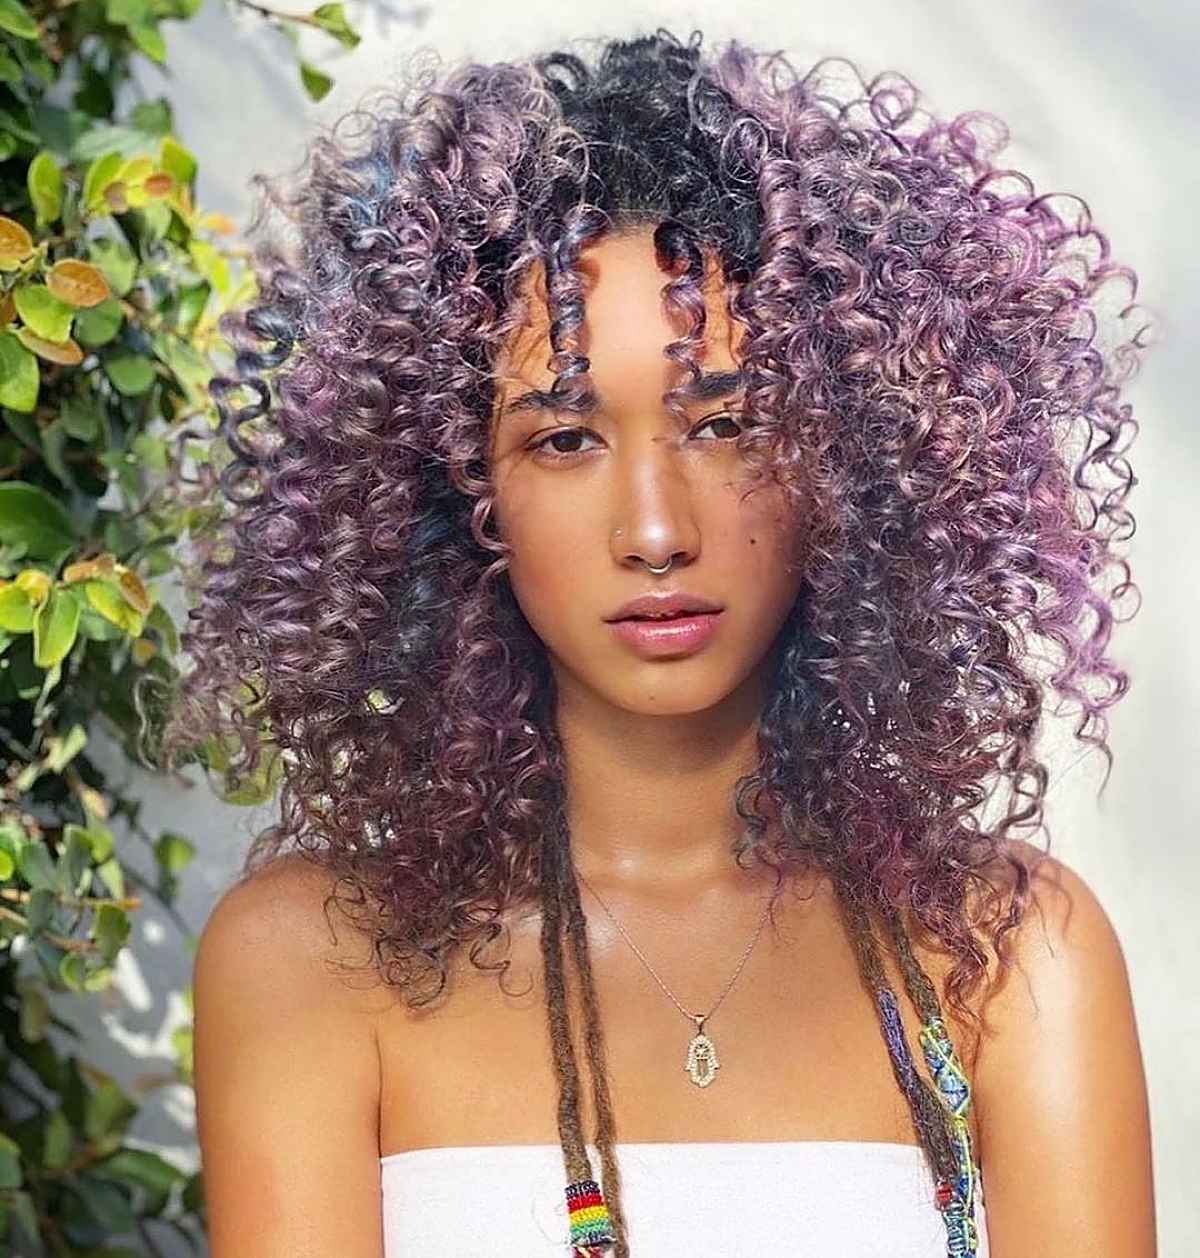 Top 22 Pastel Purple Hair Color Ideas You&#8217;ll See in 2021